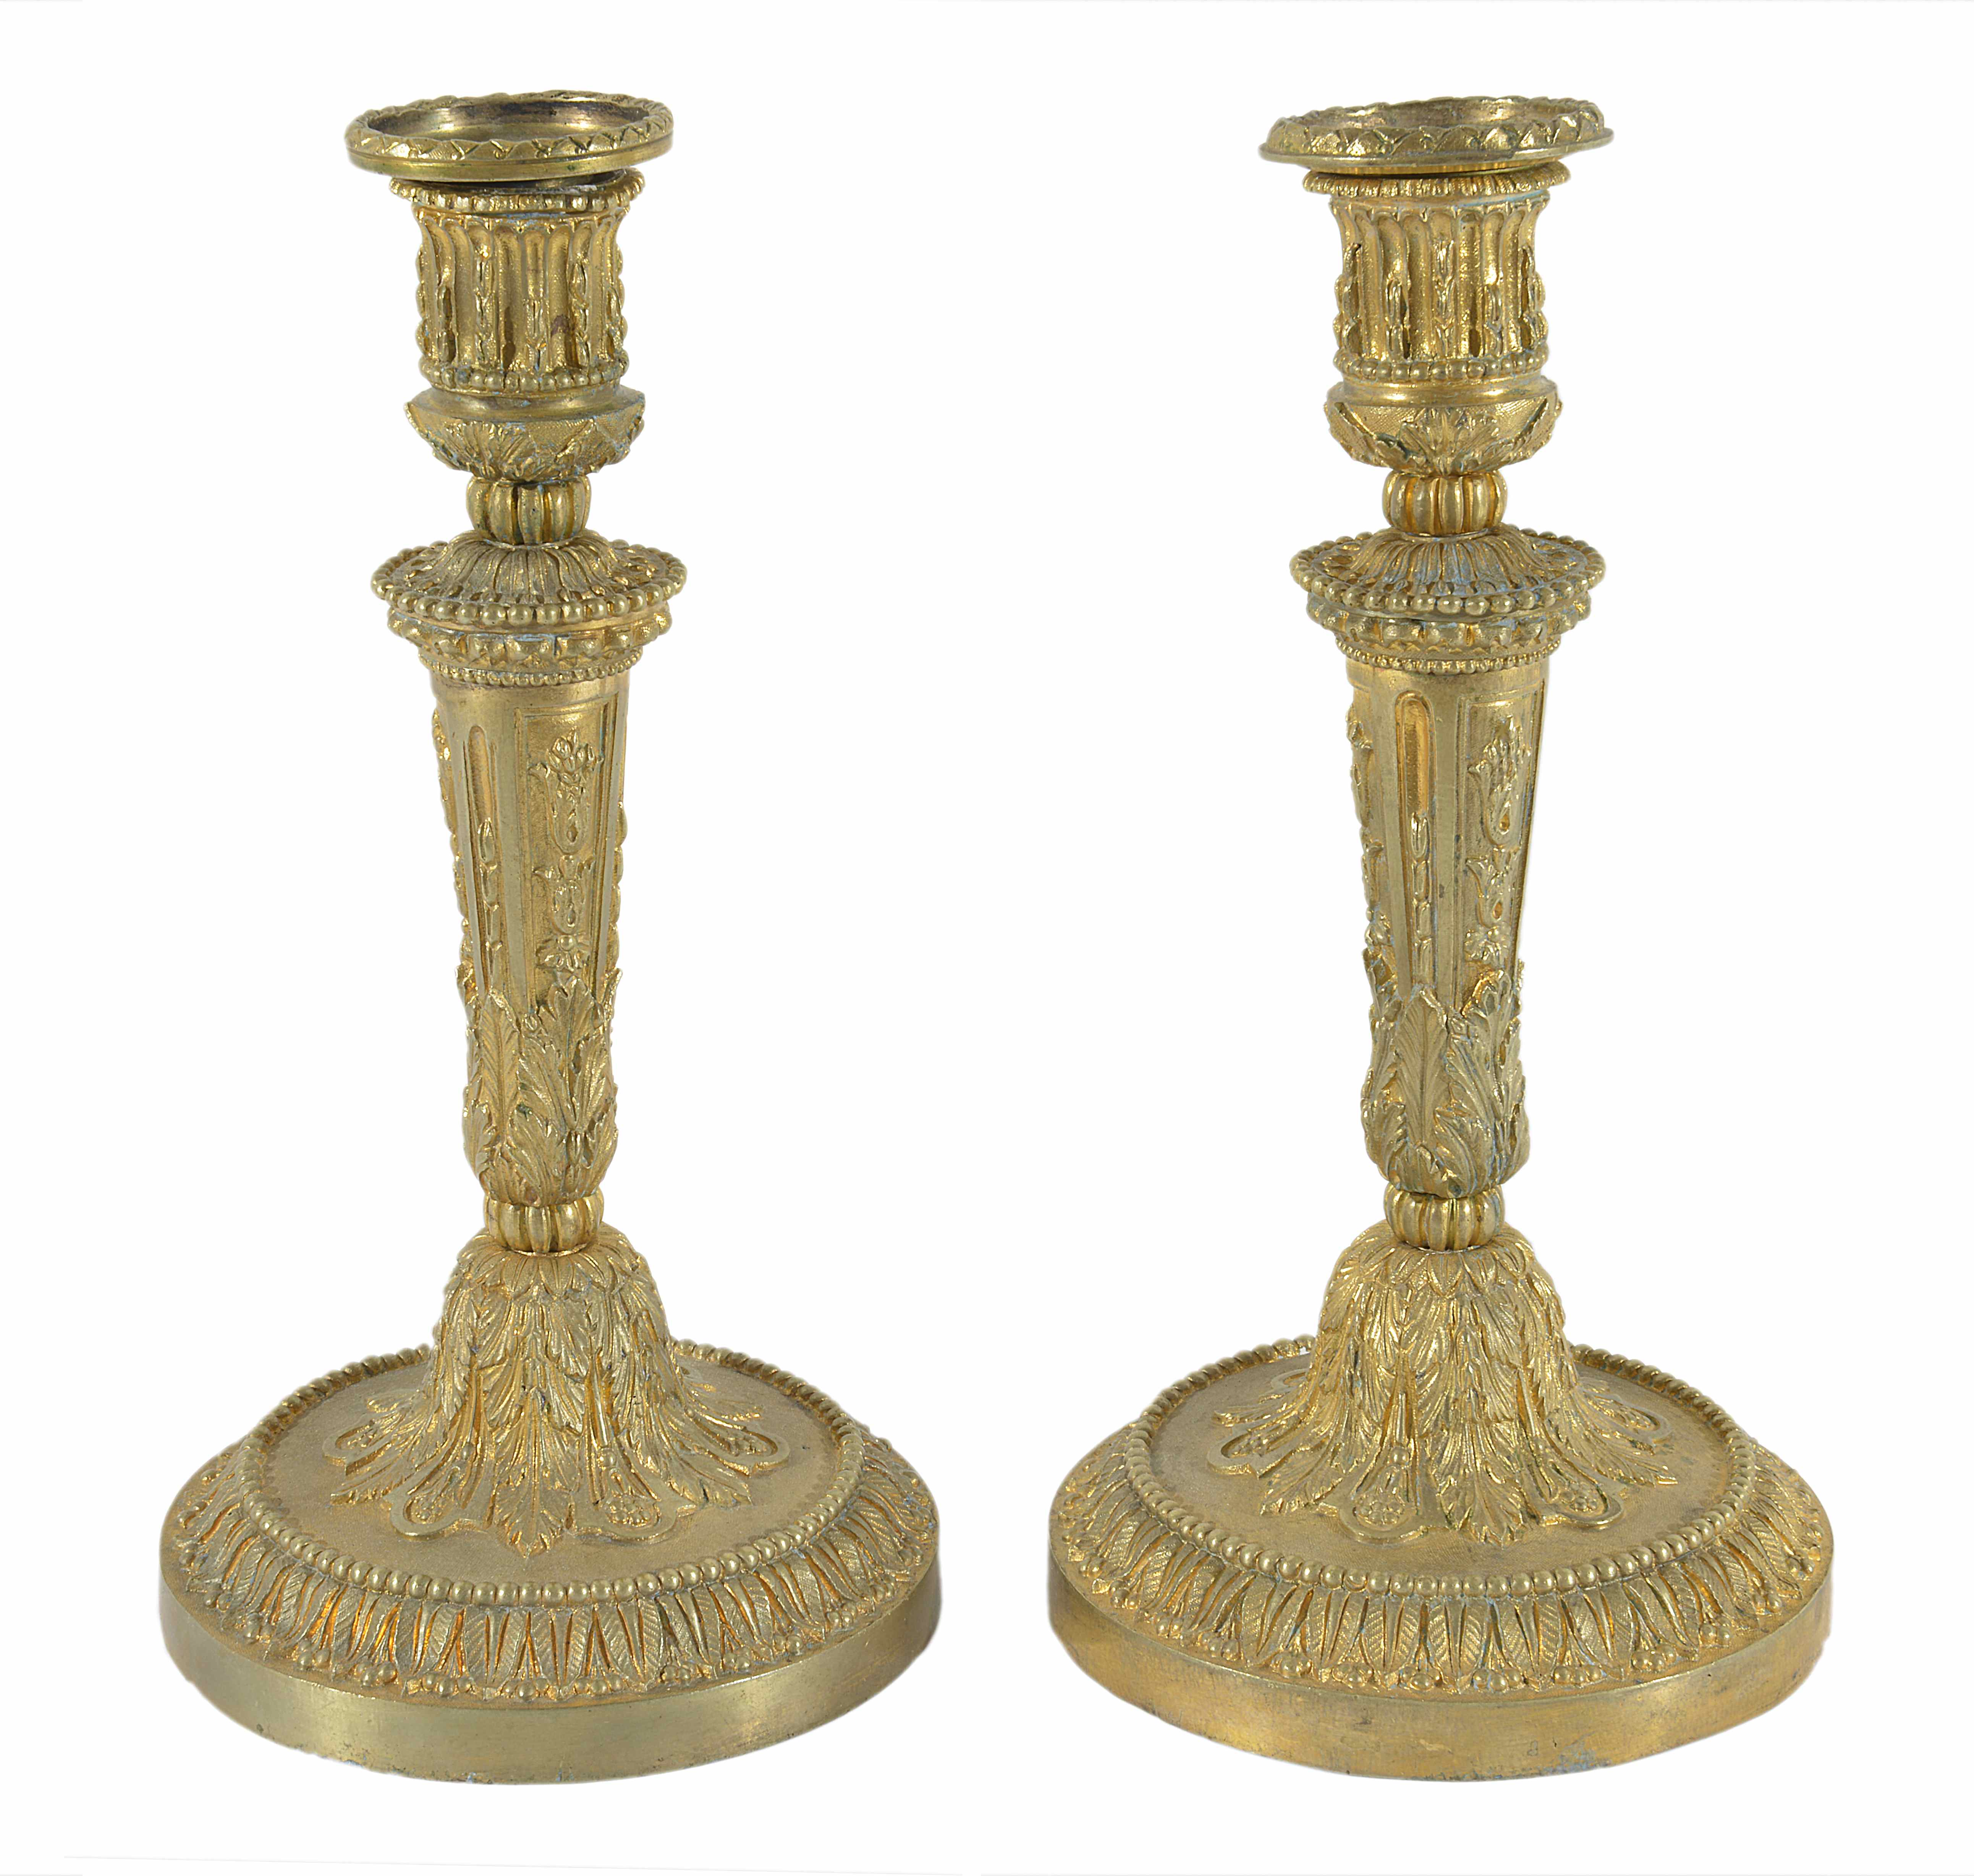 A pair of ornate gilt metal candlesticks
probably late 19th century
with tapering stems and cast